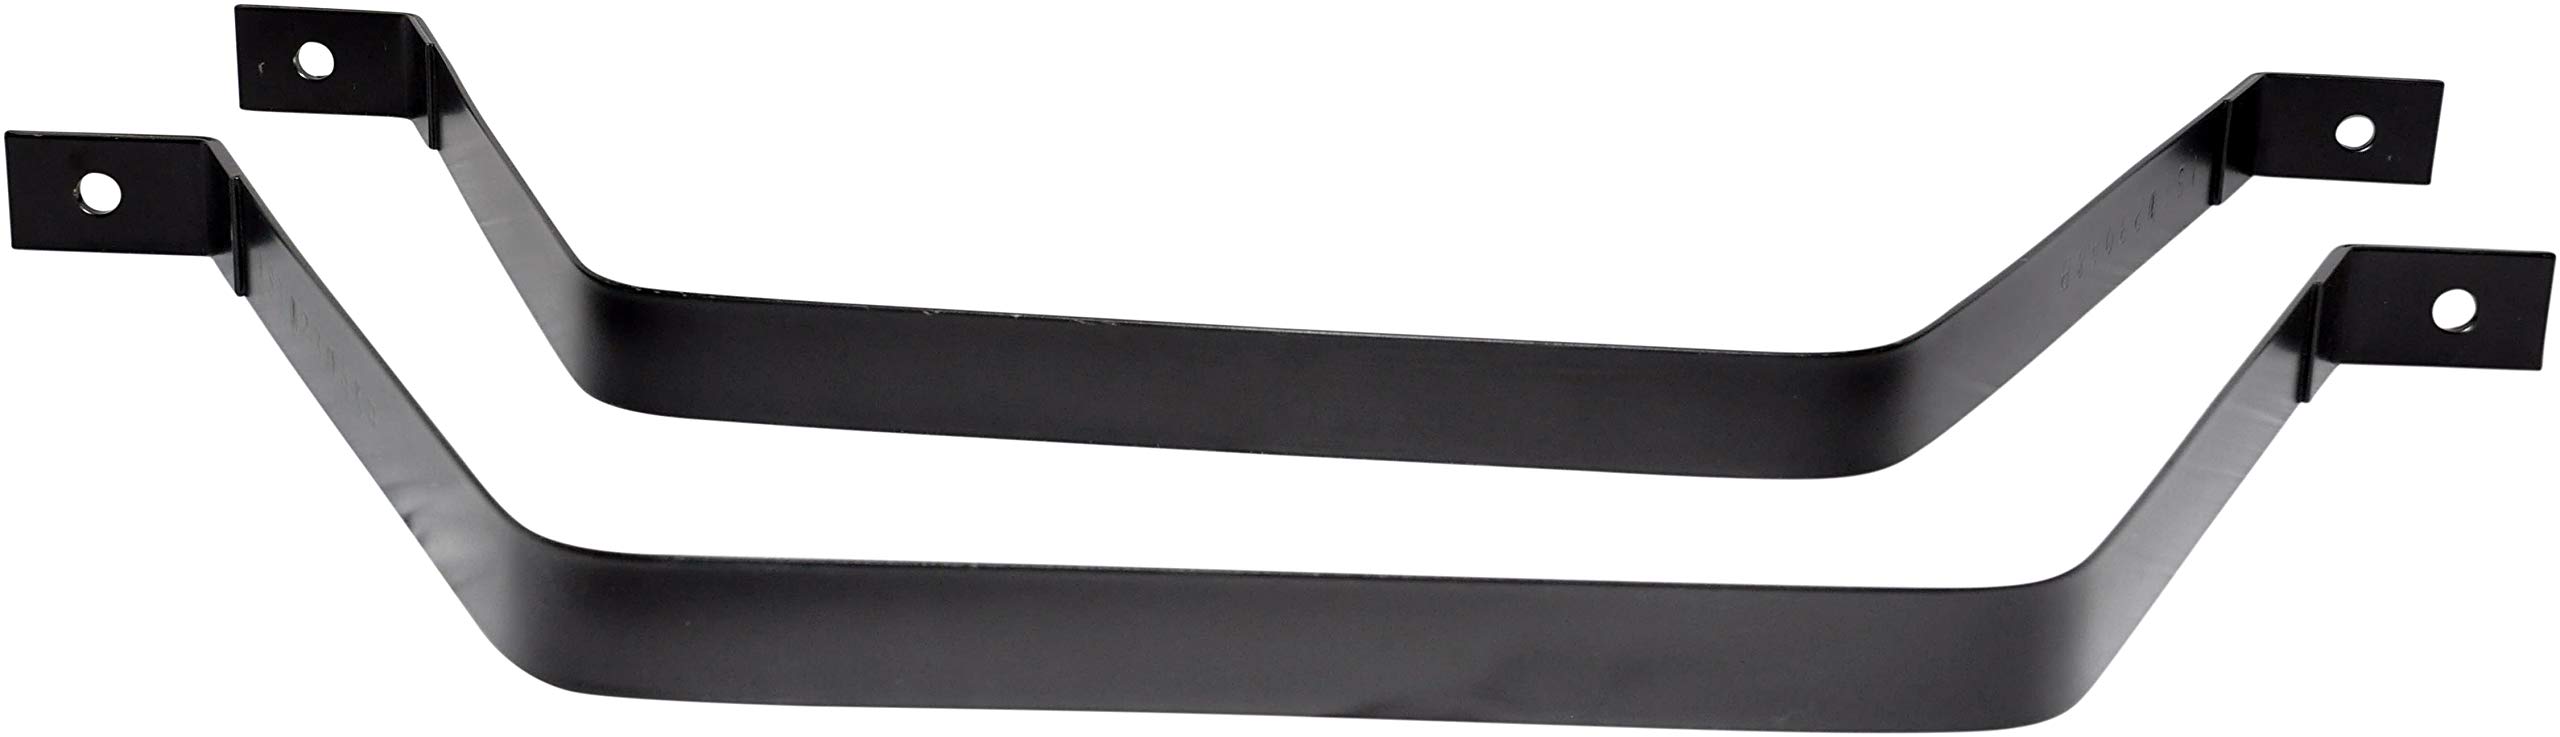 Dorman 578-230 Fuel Tank Strap compatible with Select Jeep Models, Black